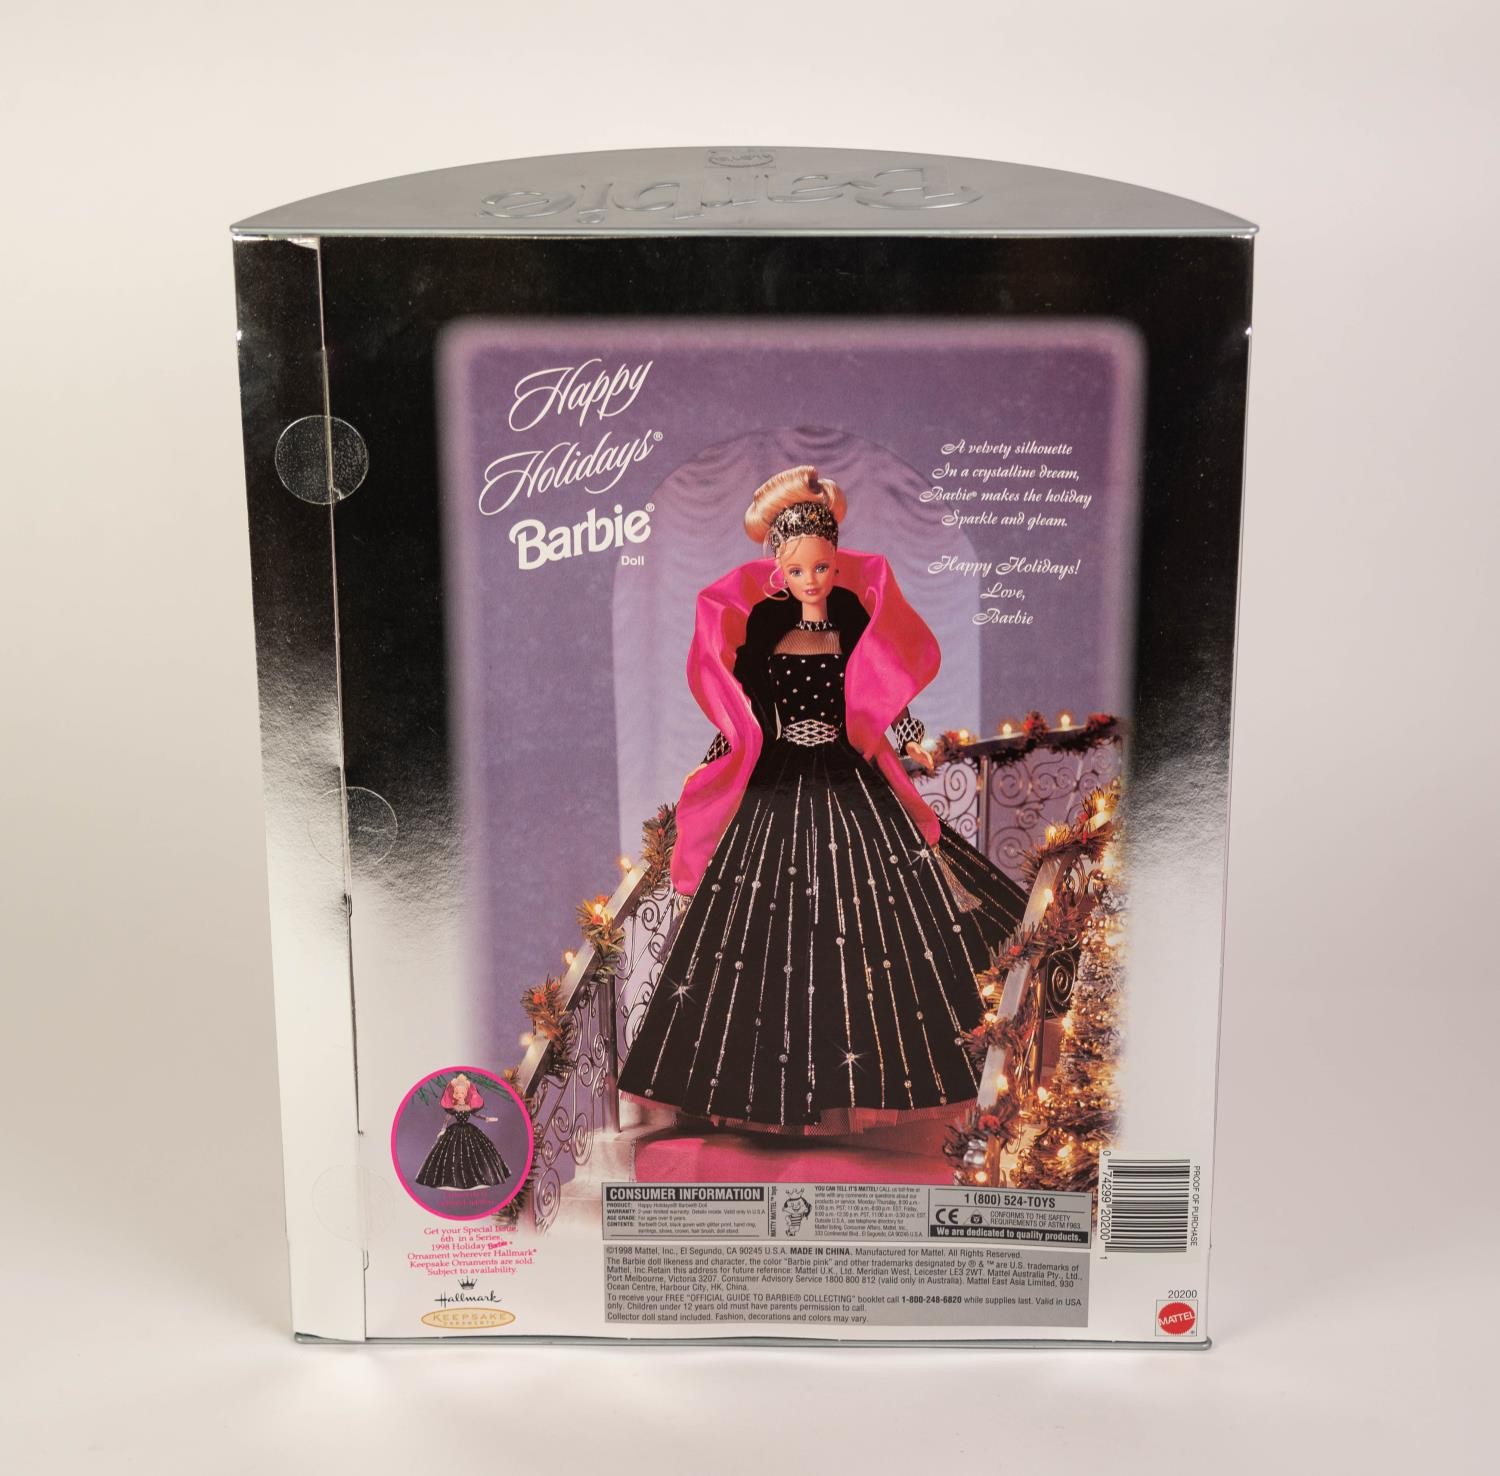 1998 MATTEL HAPPY HOLIDAYS BARBIE DOLL, Made in China, unopened in original box - Image 2 of 2